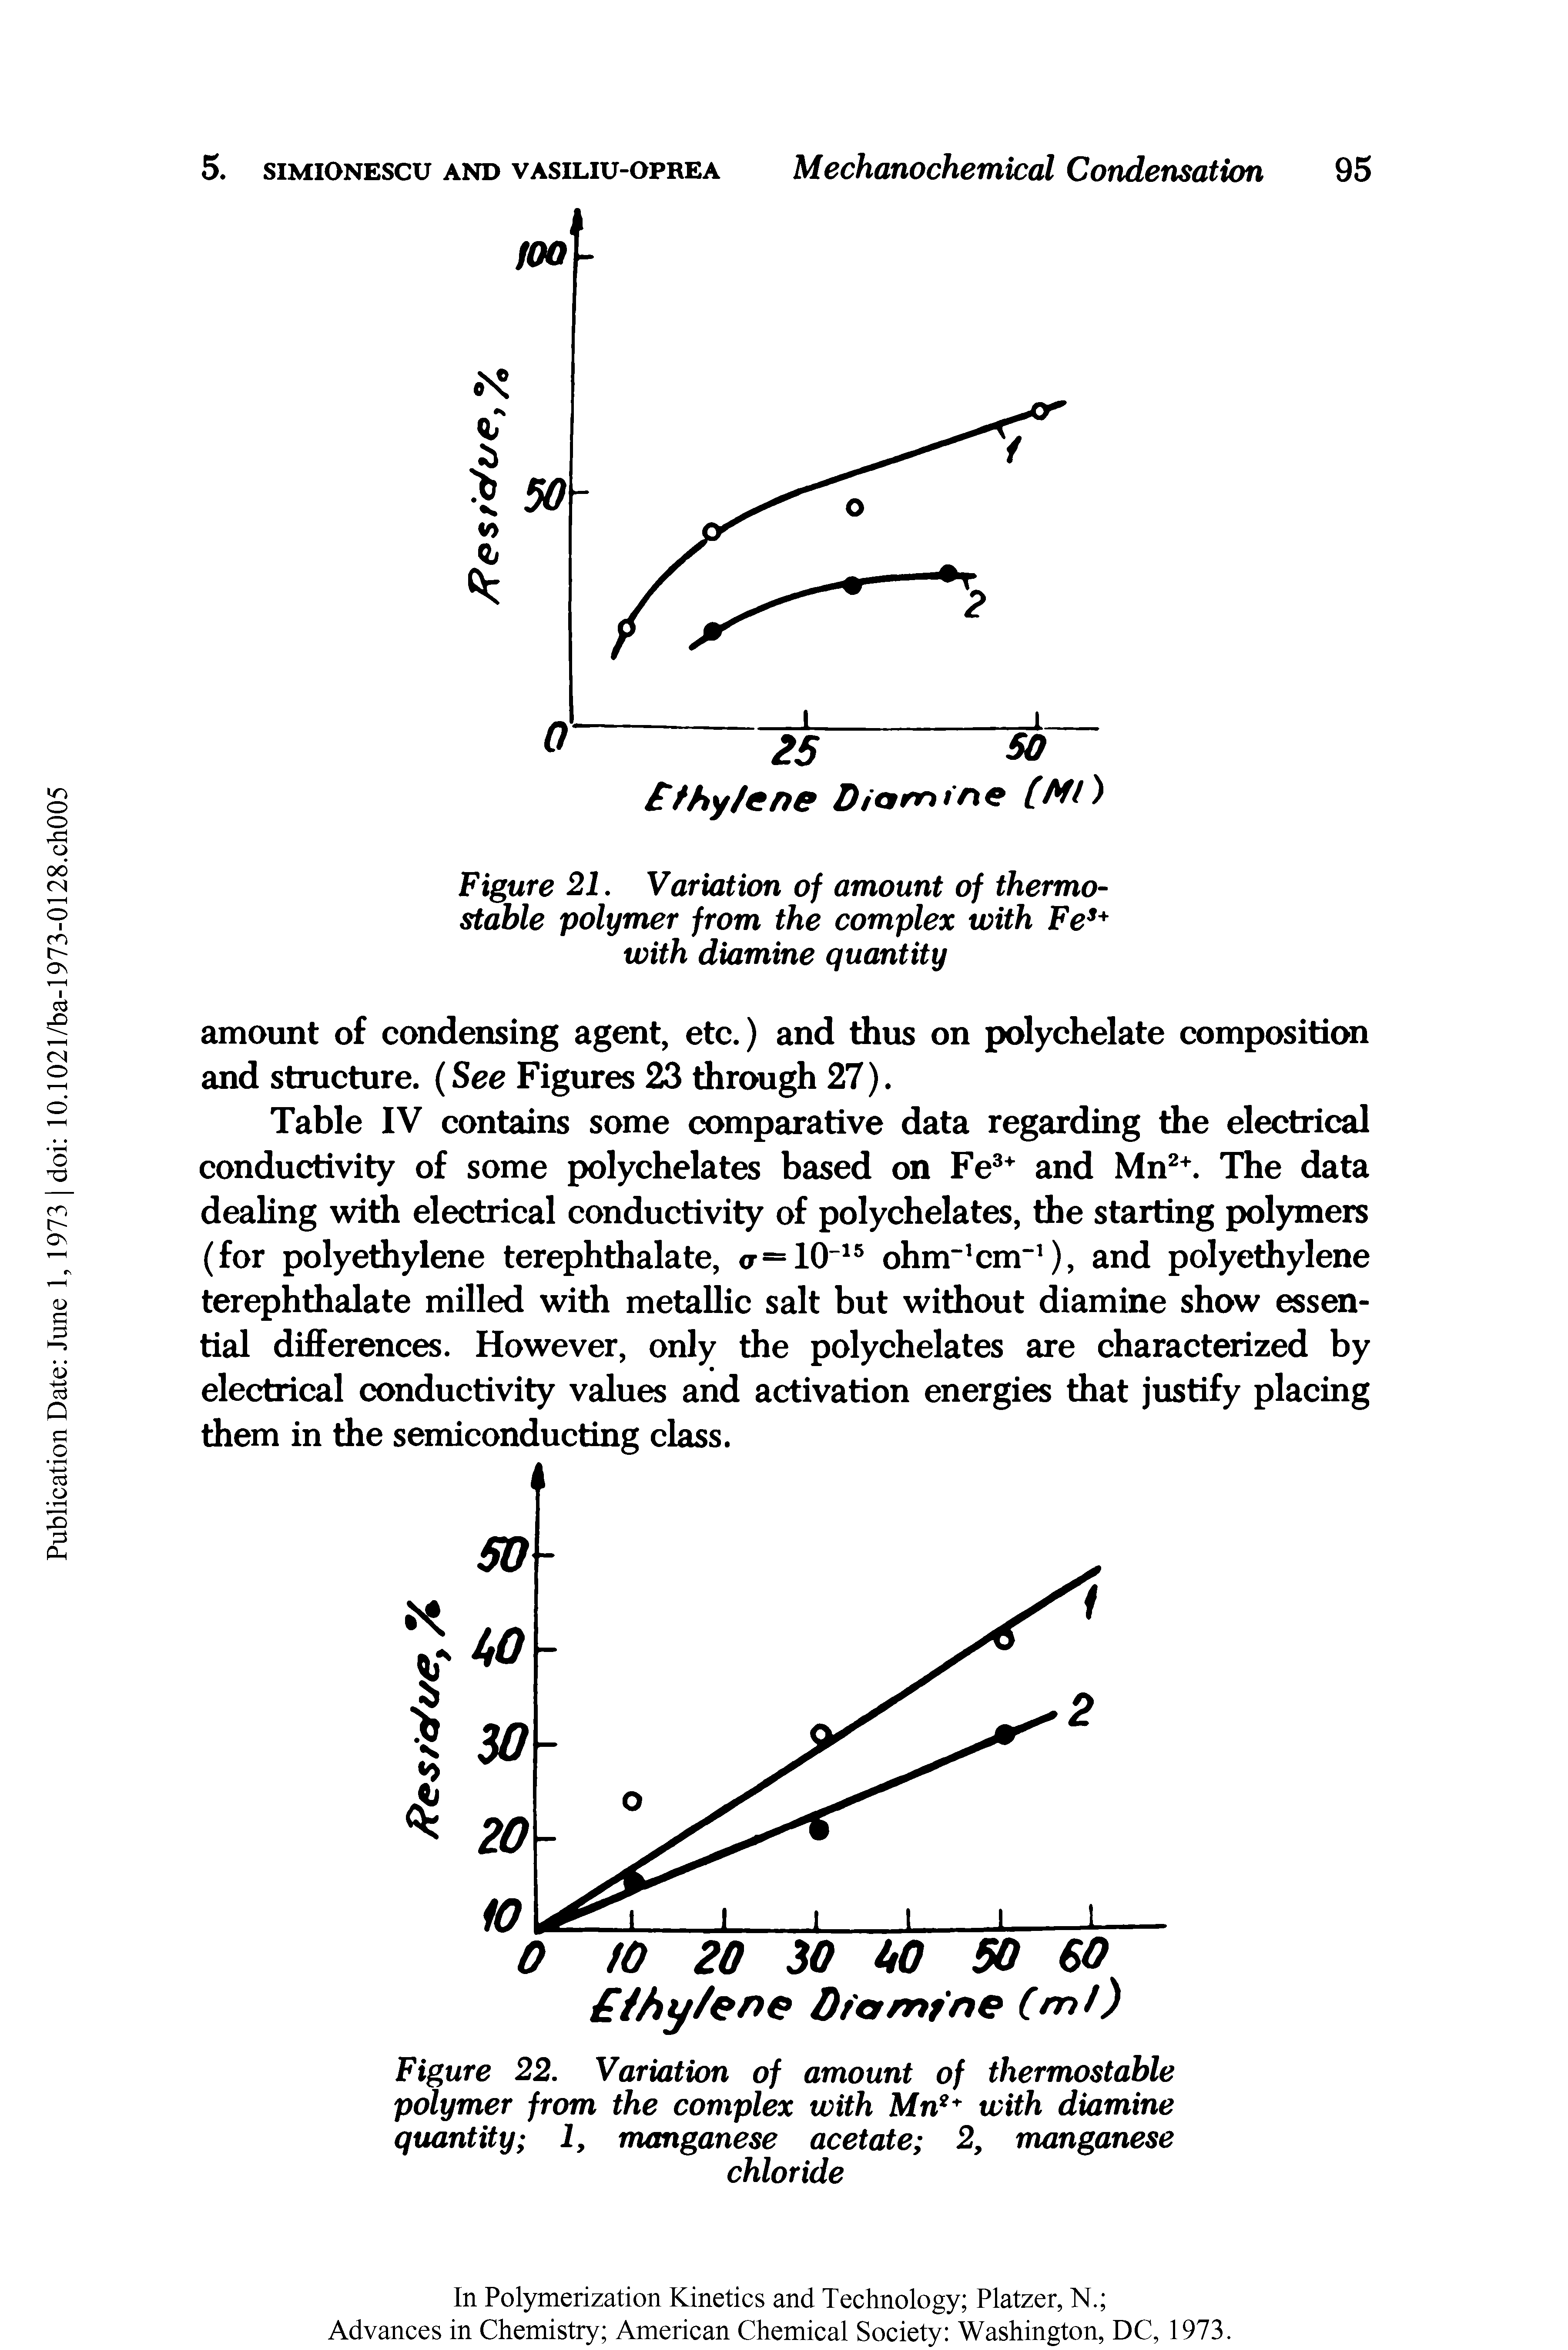 Table IV contains some comparative data regarding the electrical conductivity of some polychelates based on Fe3+ and Mn2+. The data dealing with electrical conductivity of polychelates, the starting polymers (for polyethylene terephthalate, <r=1015 ohm"1cm"1), and polyethylene terephthalate milled with metallic salt but without diamine show essential differences. However, only the polychelates are characterized by electrical conductivity values and activation energies that justify placing them in the semiconducting class.